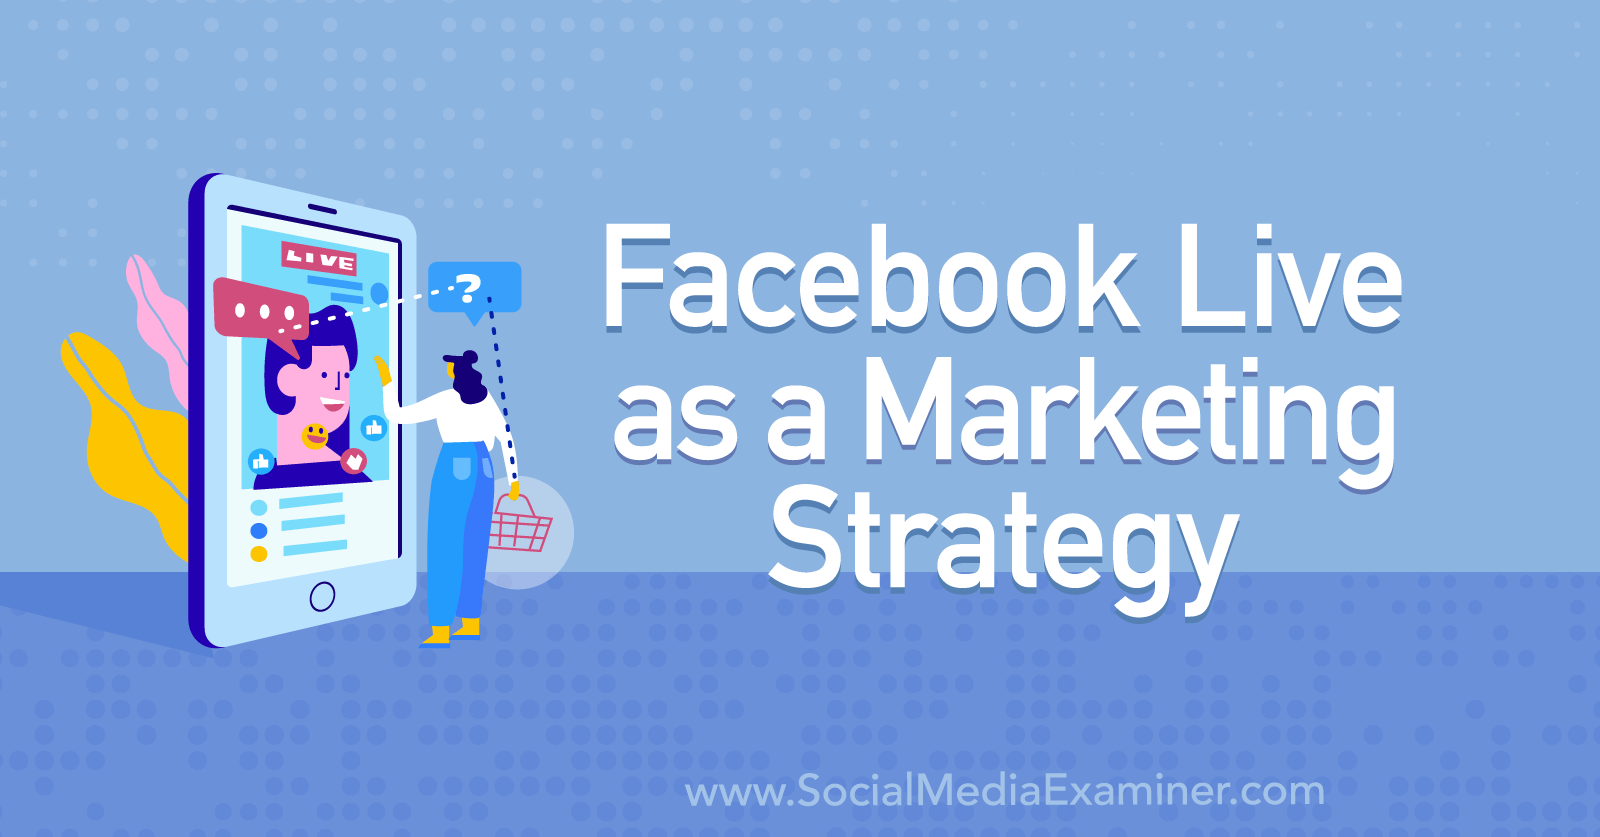 Facebook Live as a Marketing Strategy featuring insights from Tiffany Lee Bymaster on the Social Media Marketing Podcast.